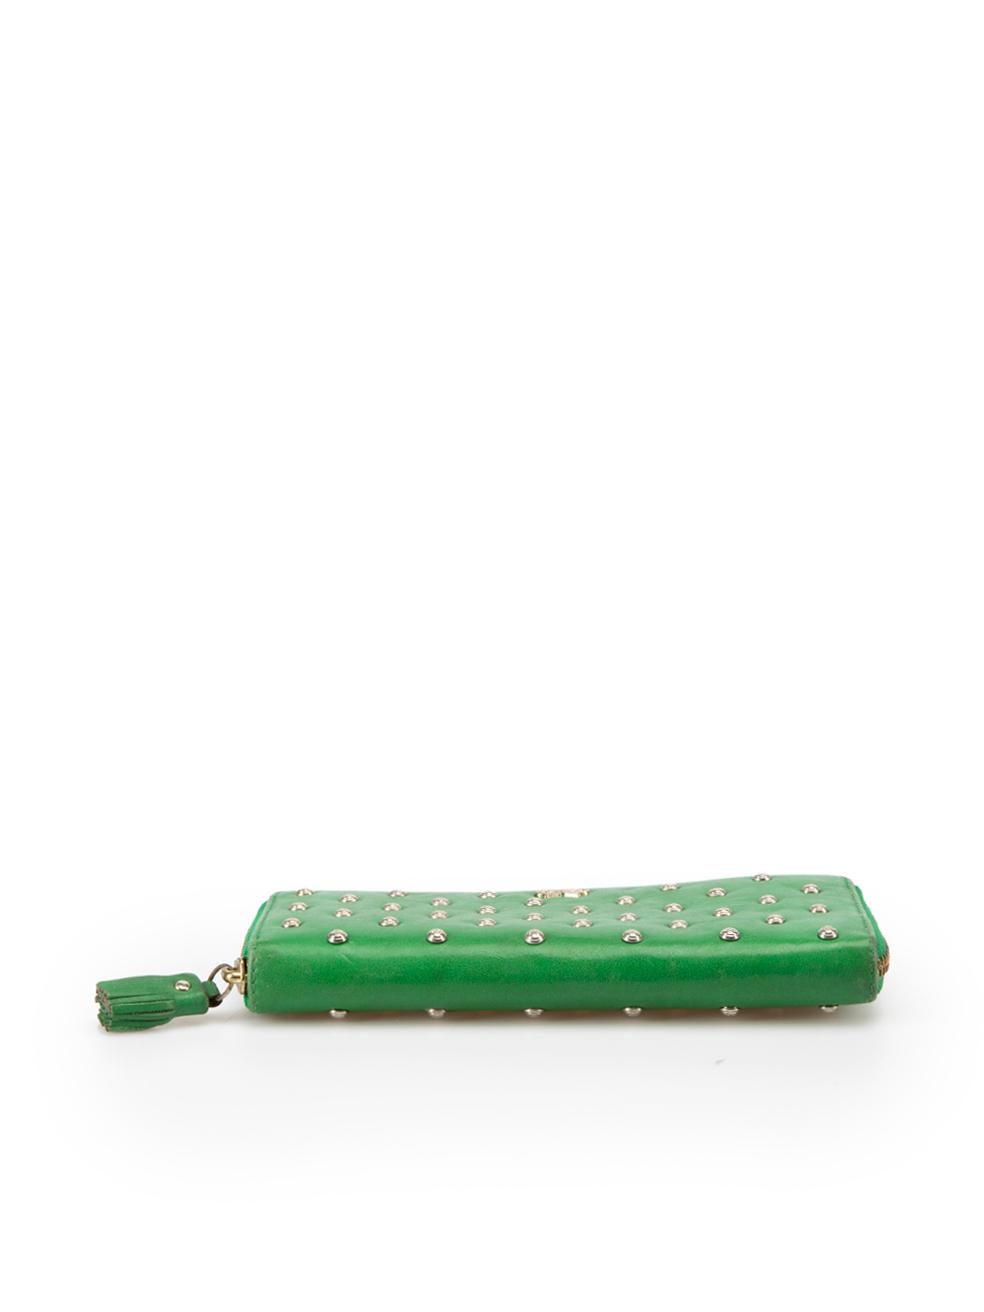 Anya Hindmarch Women's Green Leather Studded Continental Wallet For Sale 1